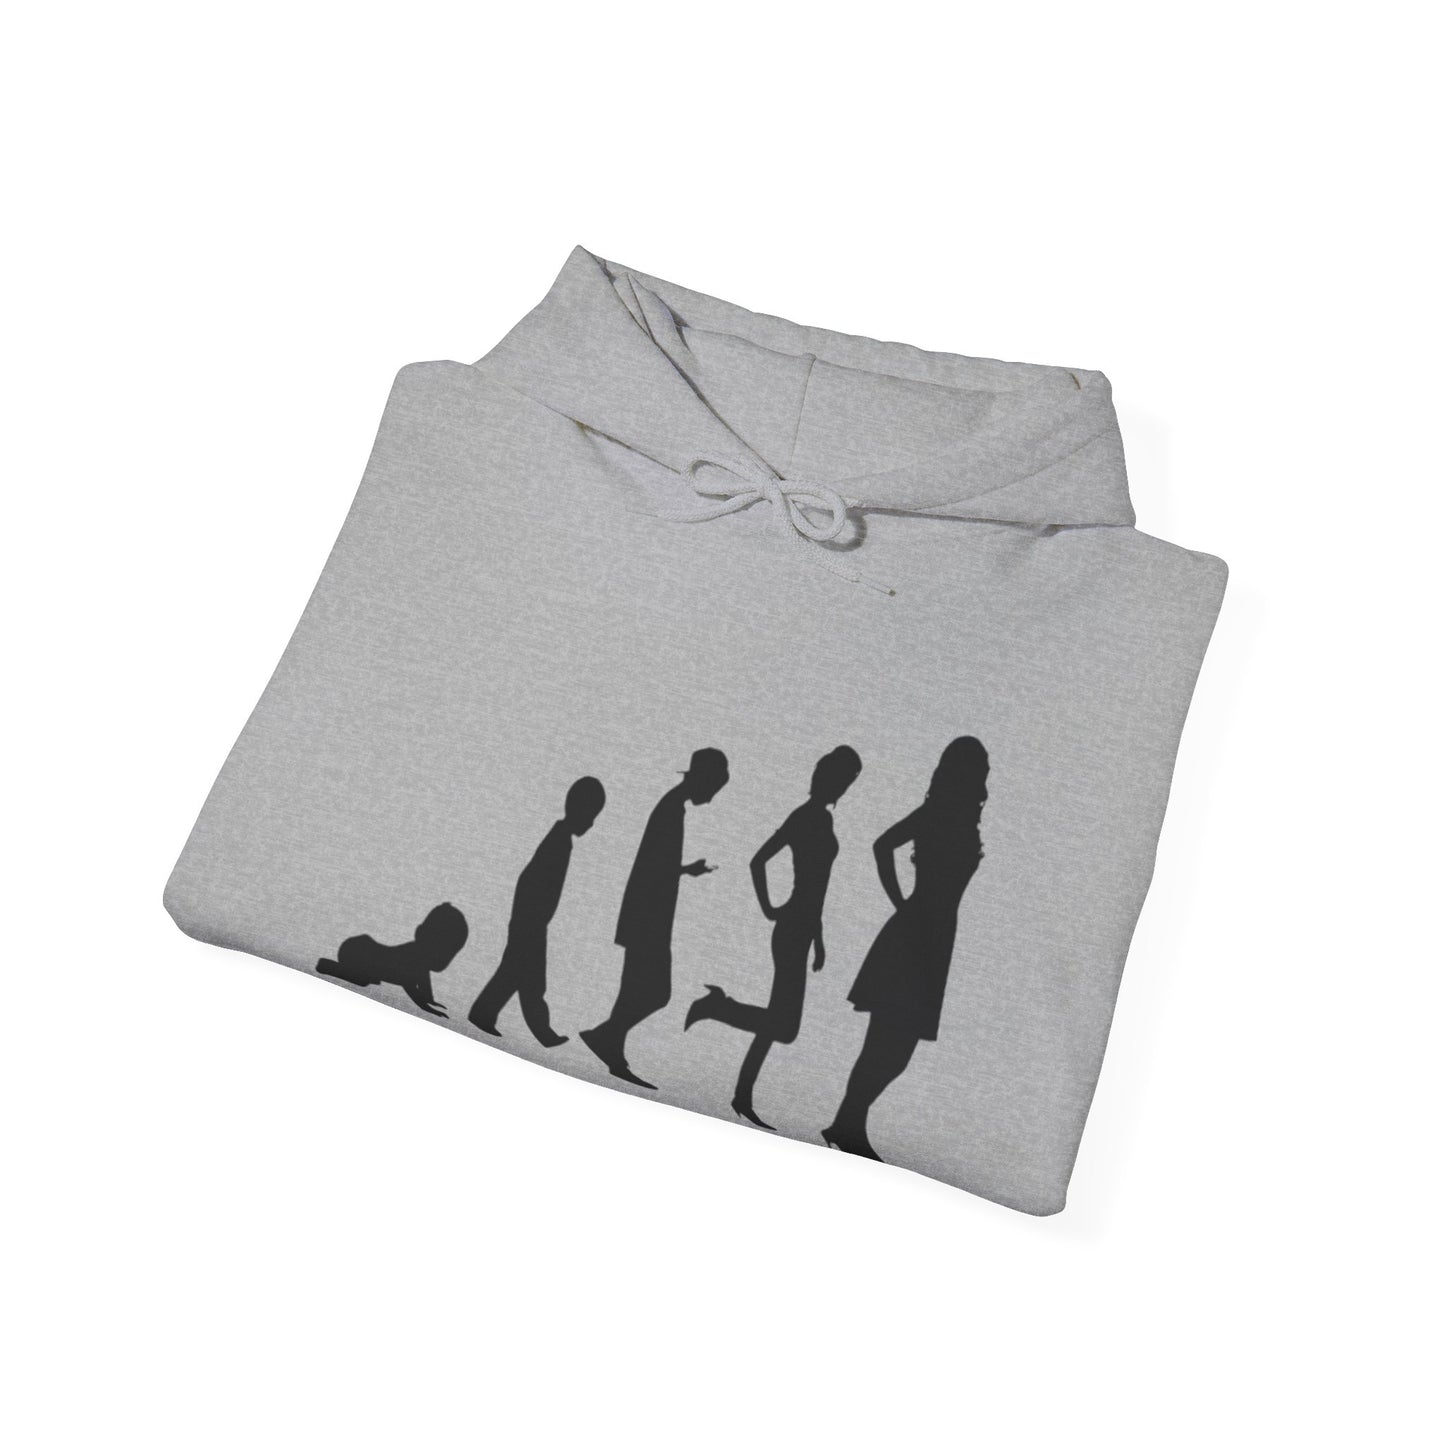 Some of Us Evolve Differently Hooded Sweatshirt, Hoodie, LGBTQ, Transgender, Trans MTF, Transsexual, LGBT, Queer, Coming Out